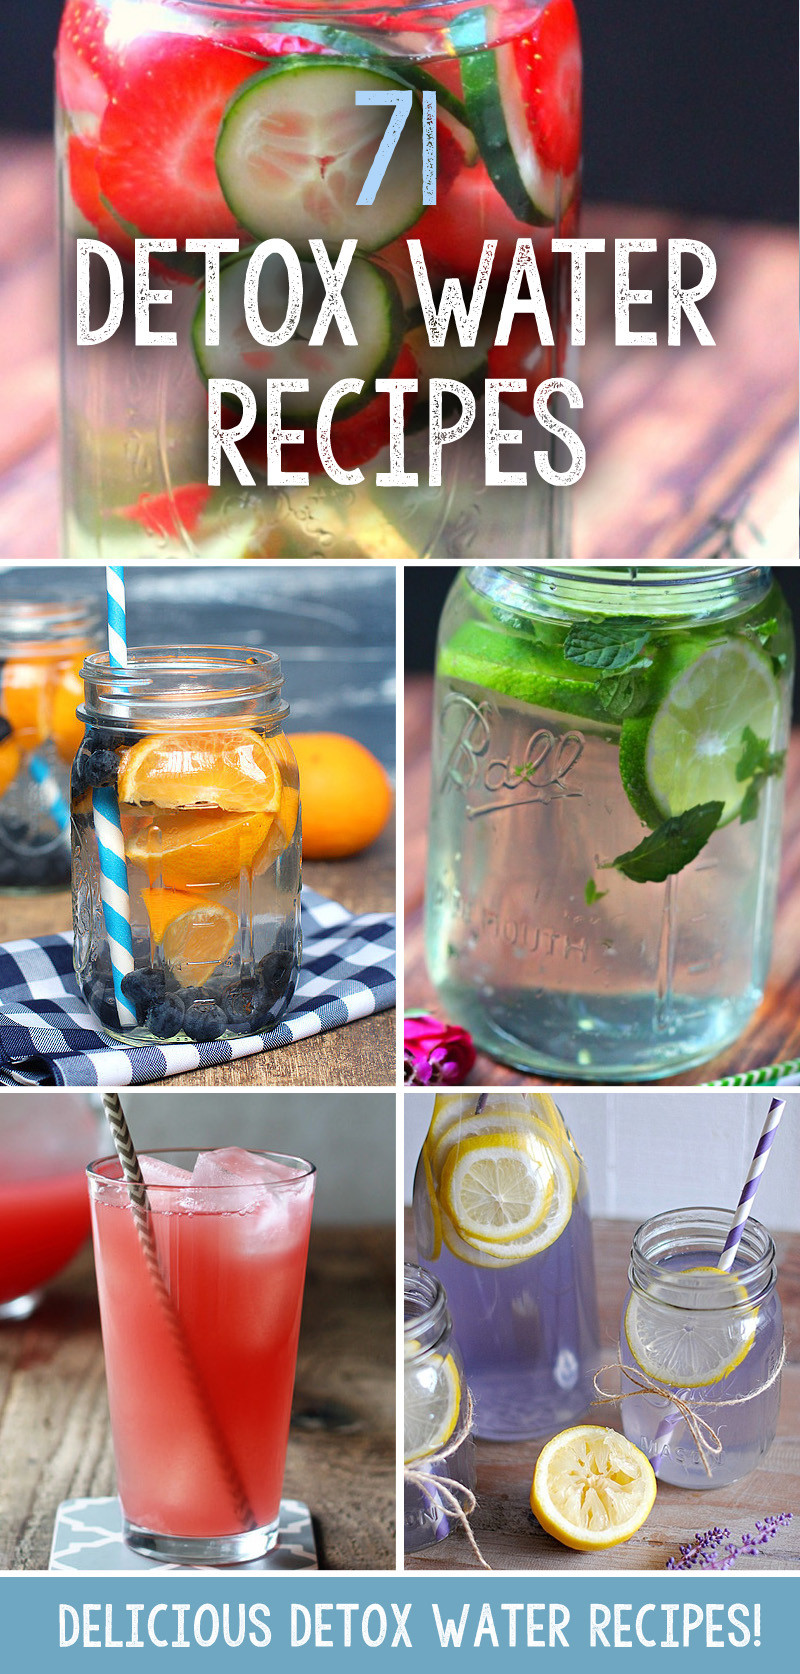 Weight Loss Waters Recipes
 71 Delicious Detox Water Recipes To Help You Lose Weight Fast